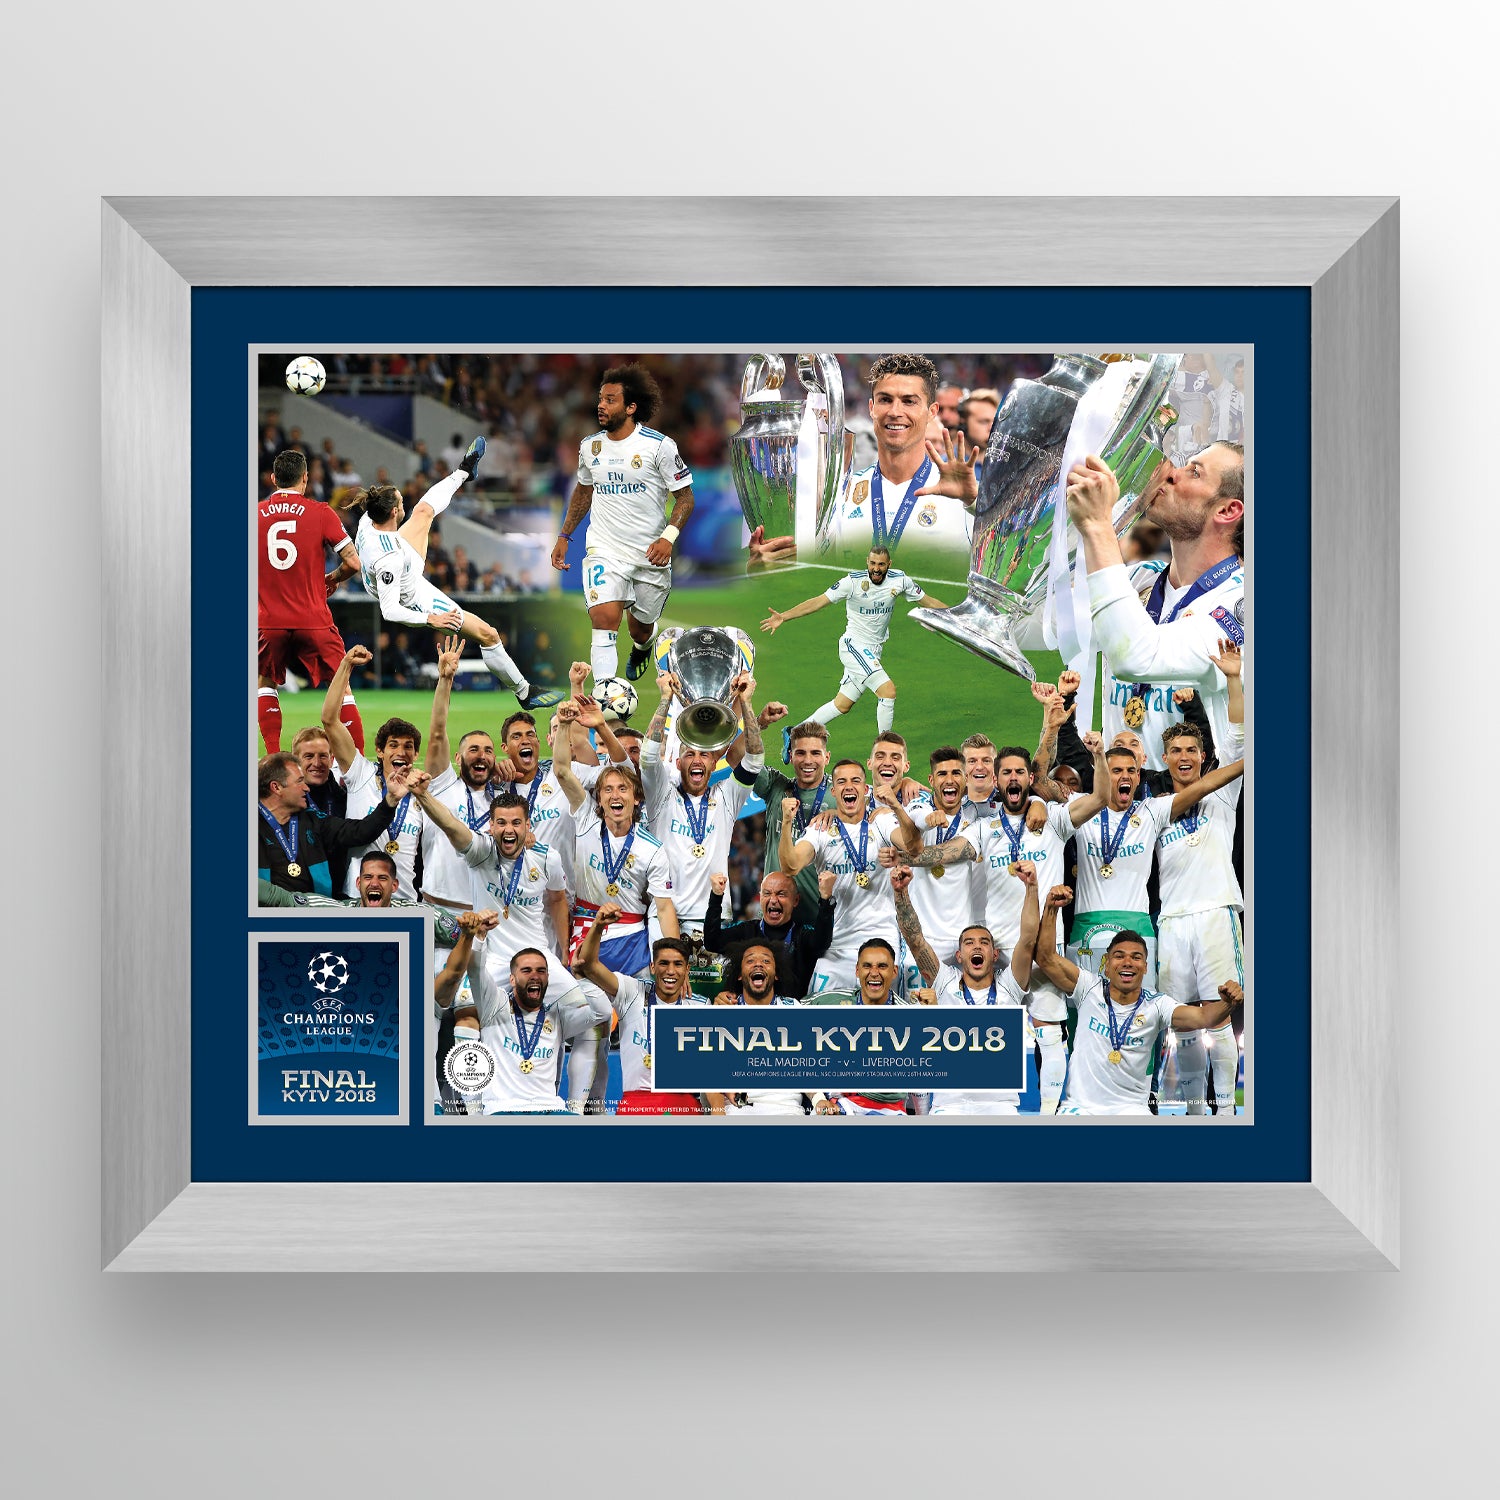 UEFA Champions League 2018 Final - Winner: Real Madrid - Silver Frame UEFA Club Competitions Online Store